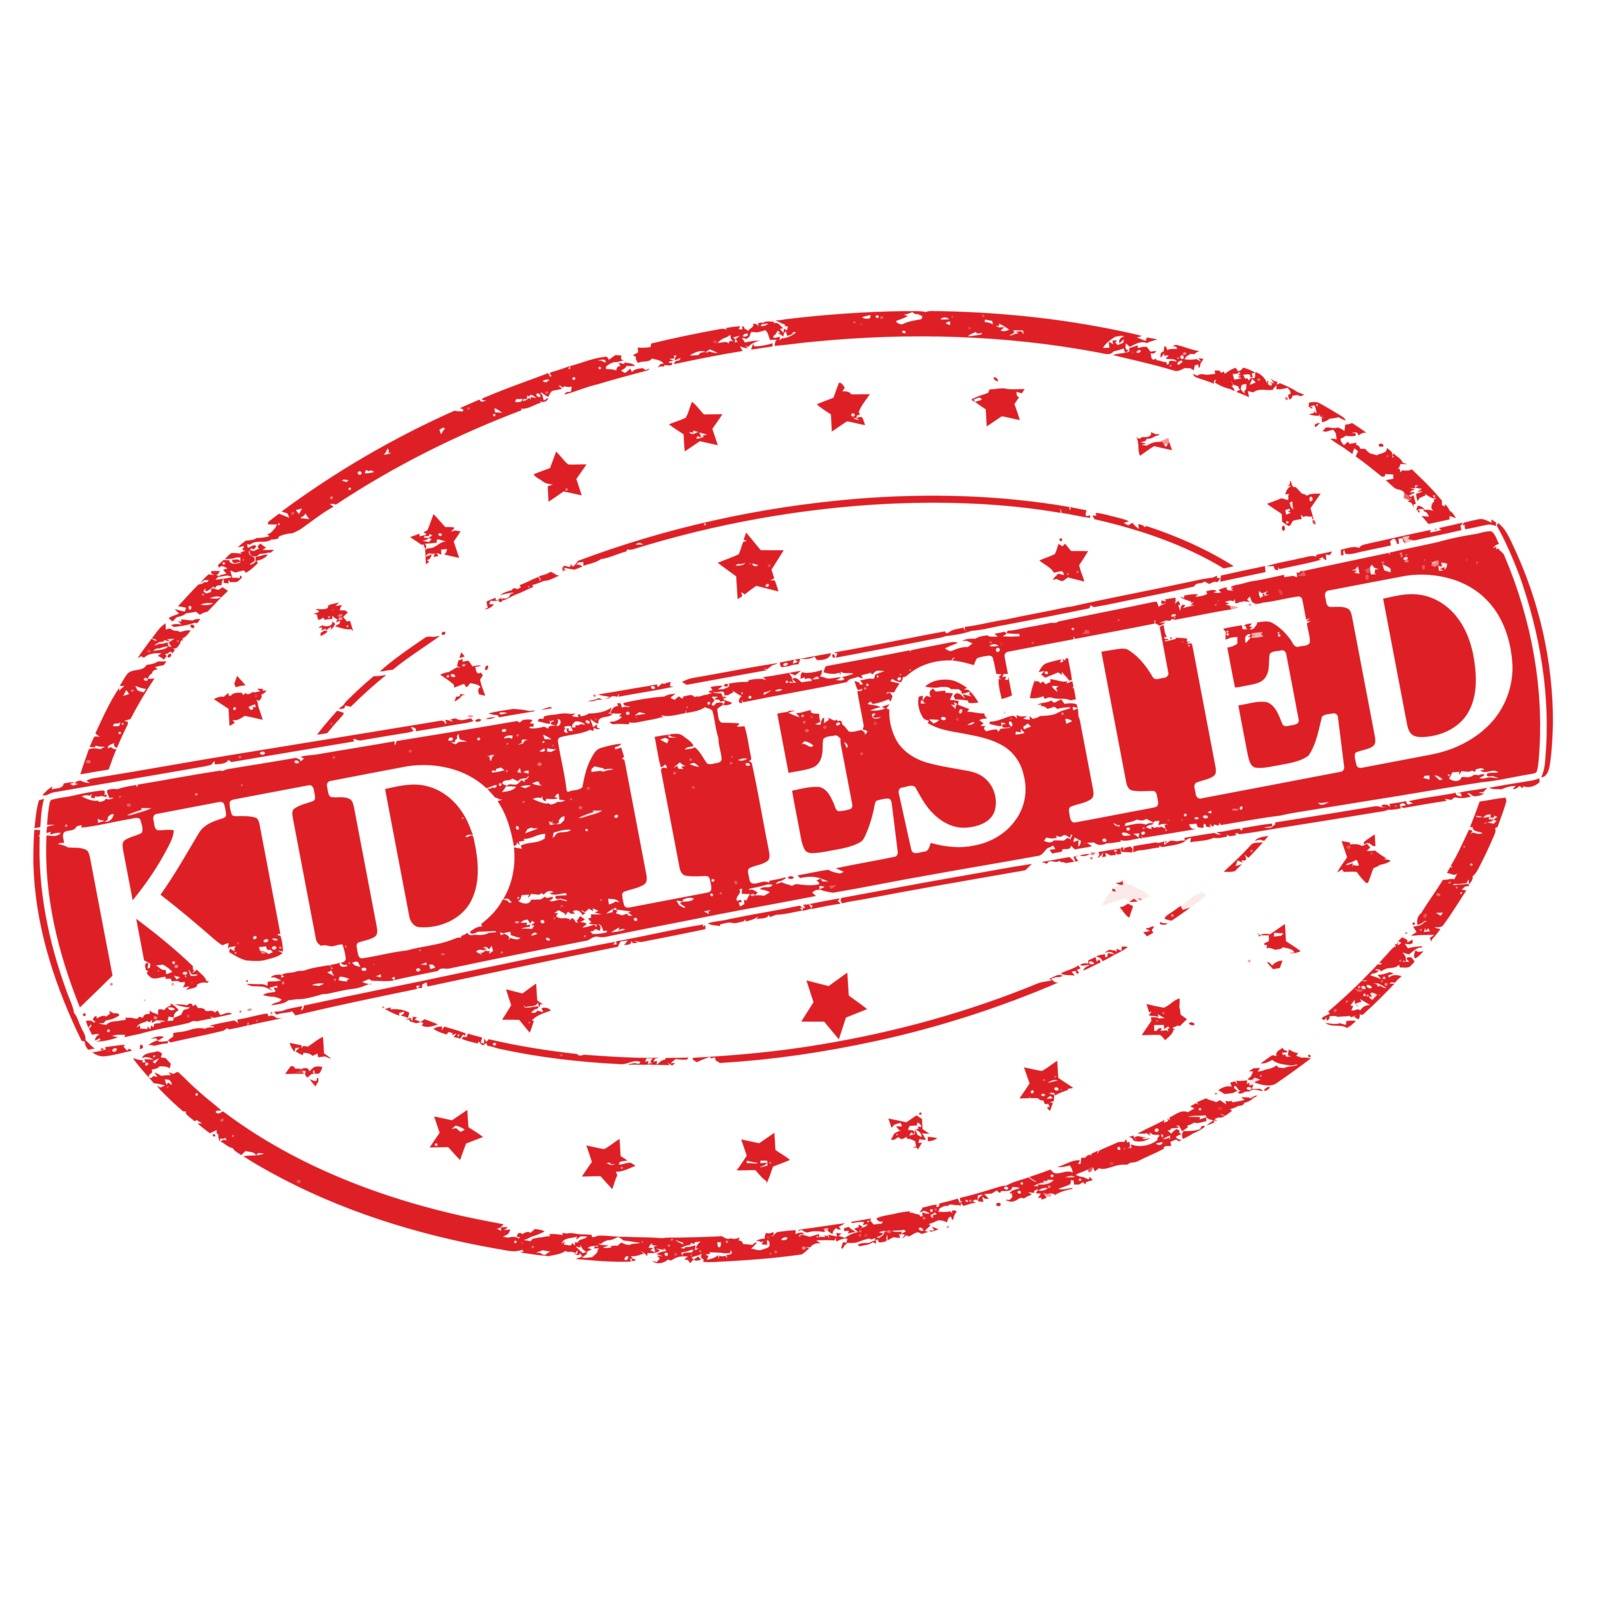 Rubber stamp with text kid tested inside, vector illustration